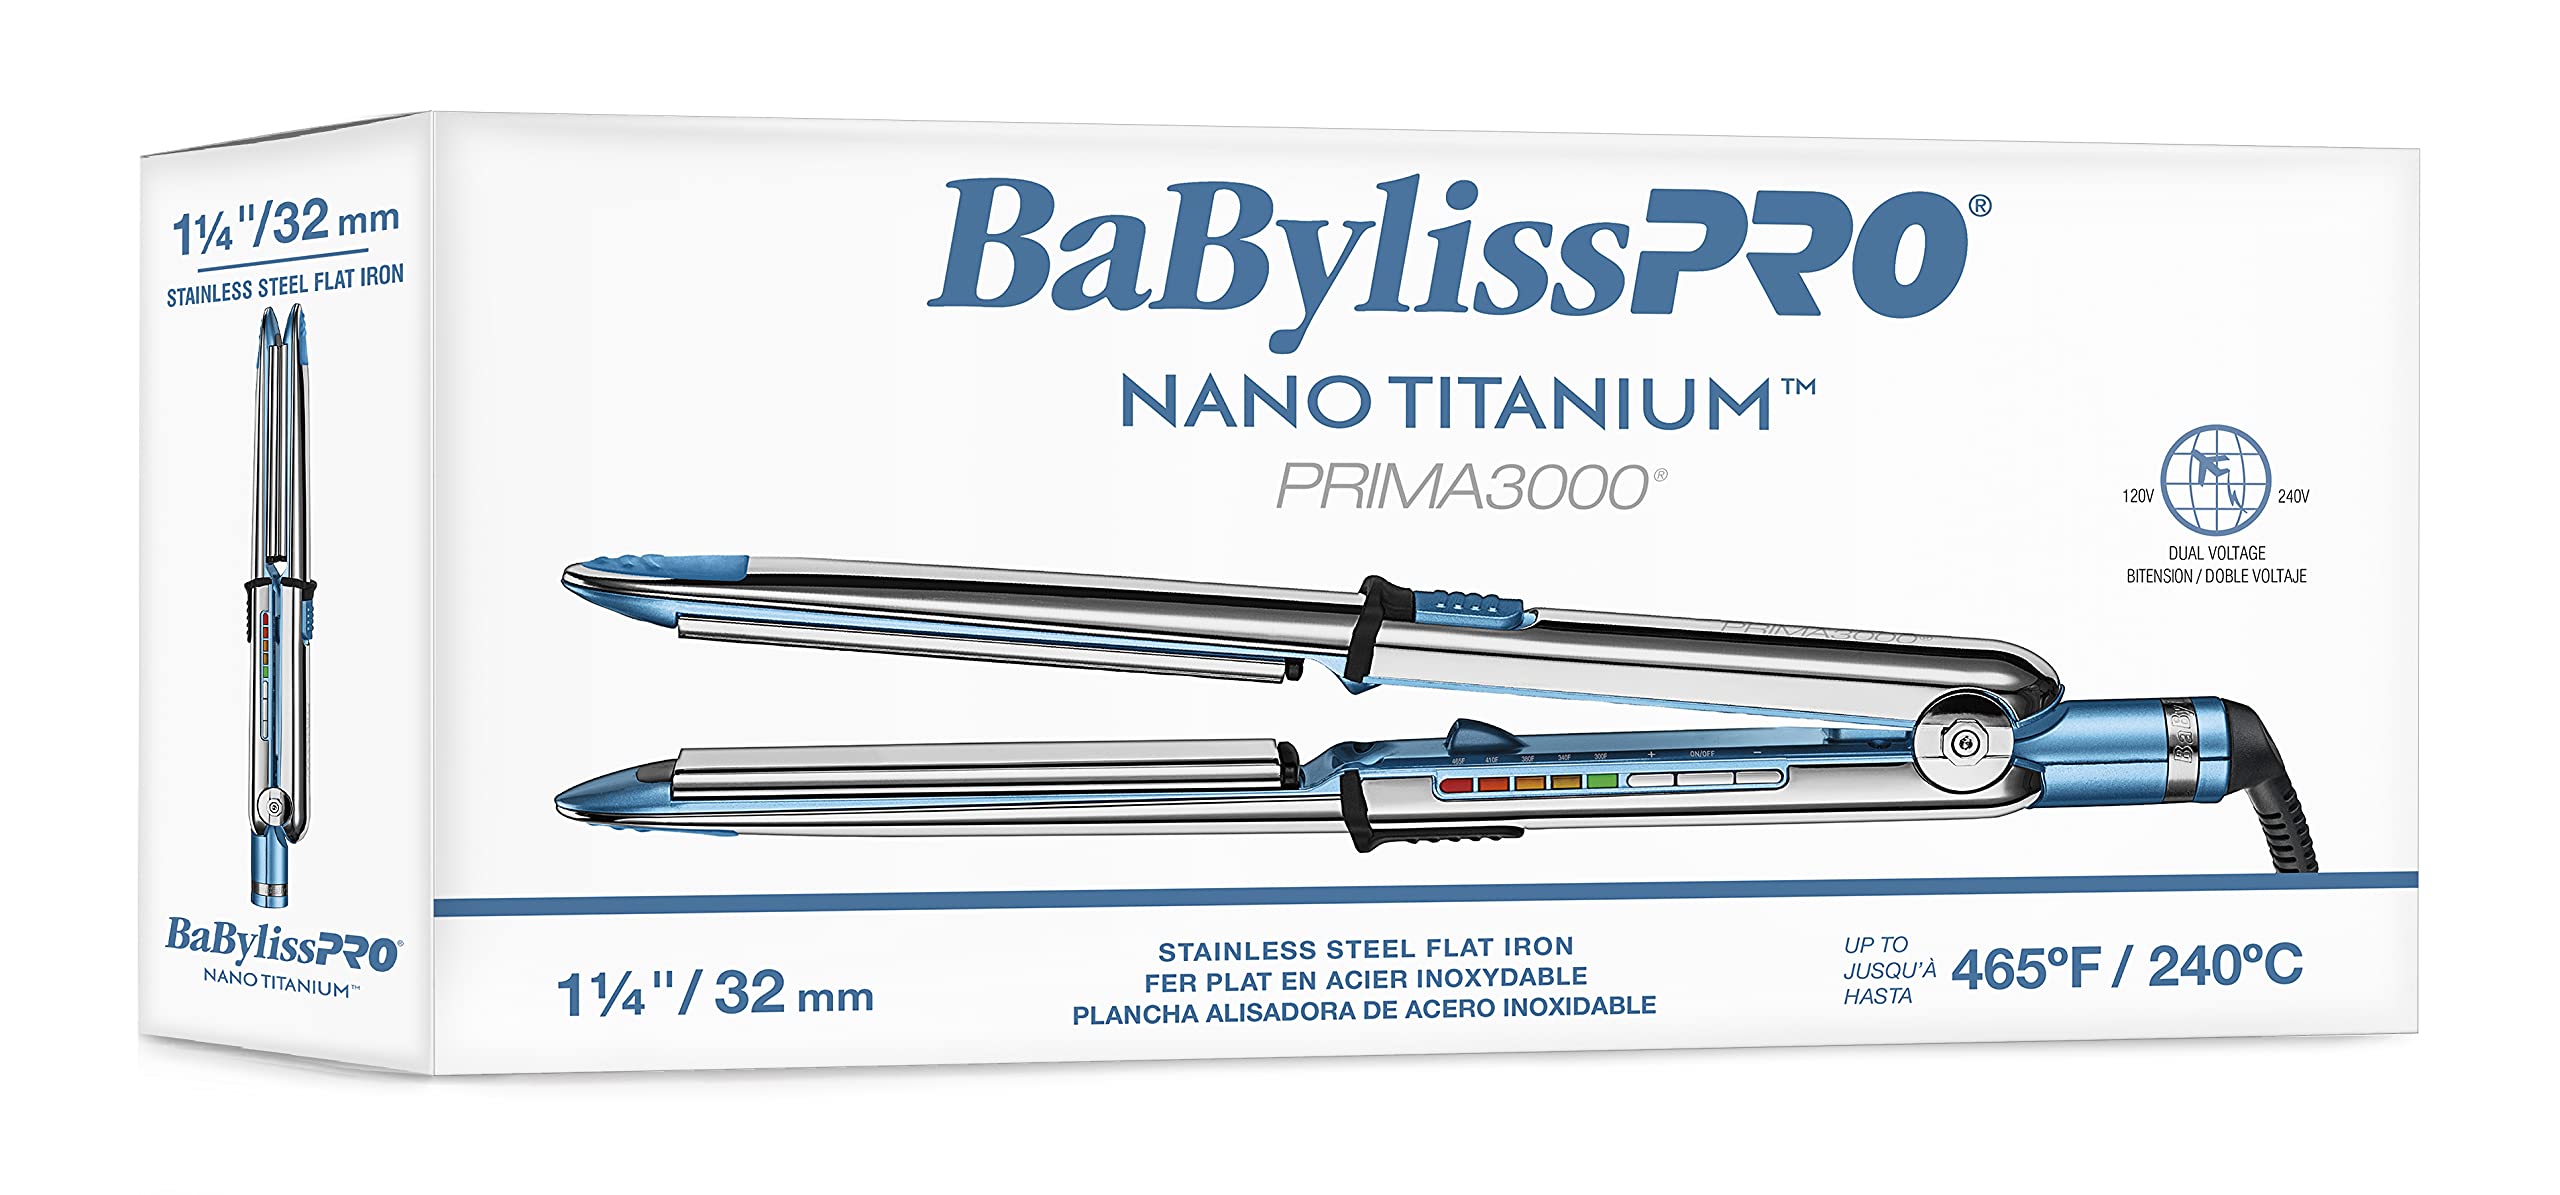 BaBylissPRO Nano Titanium Prima Ionic Hair Straightener, curl and straighten hair with one professional tool